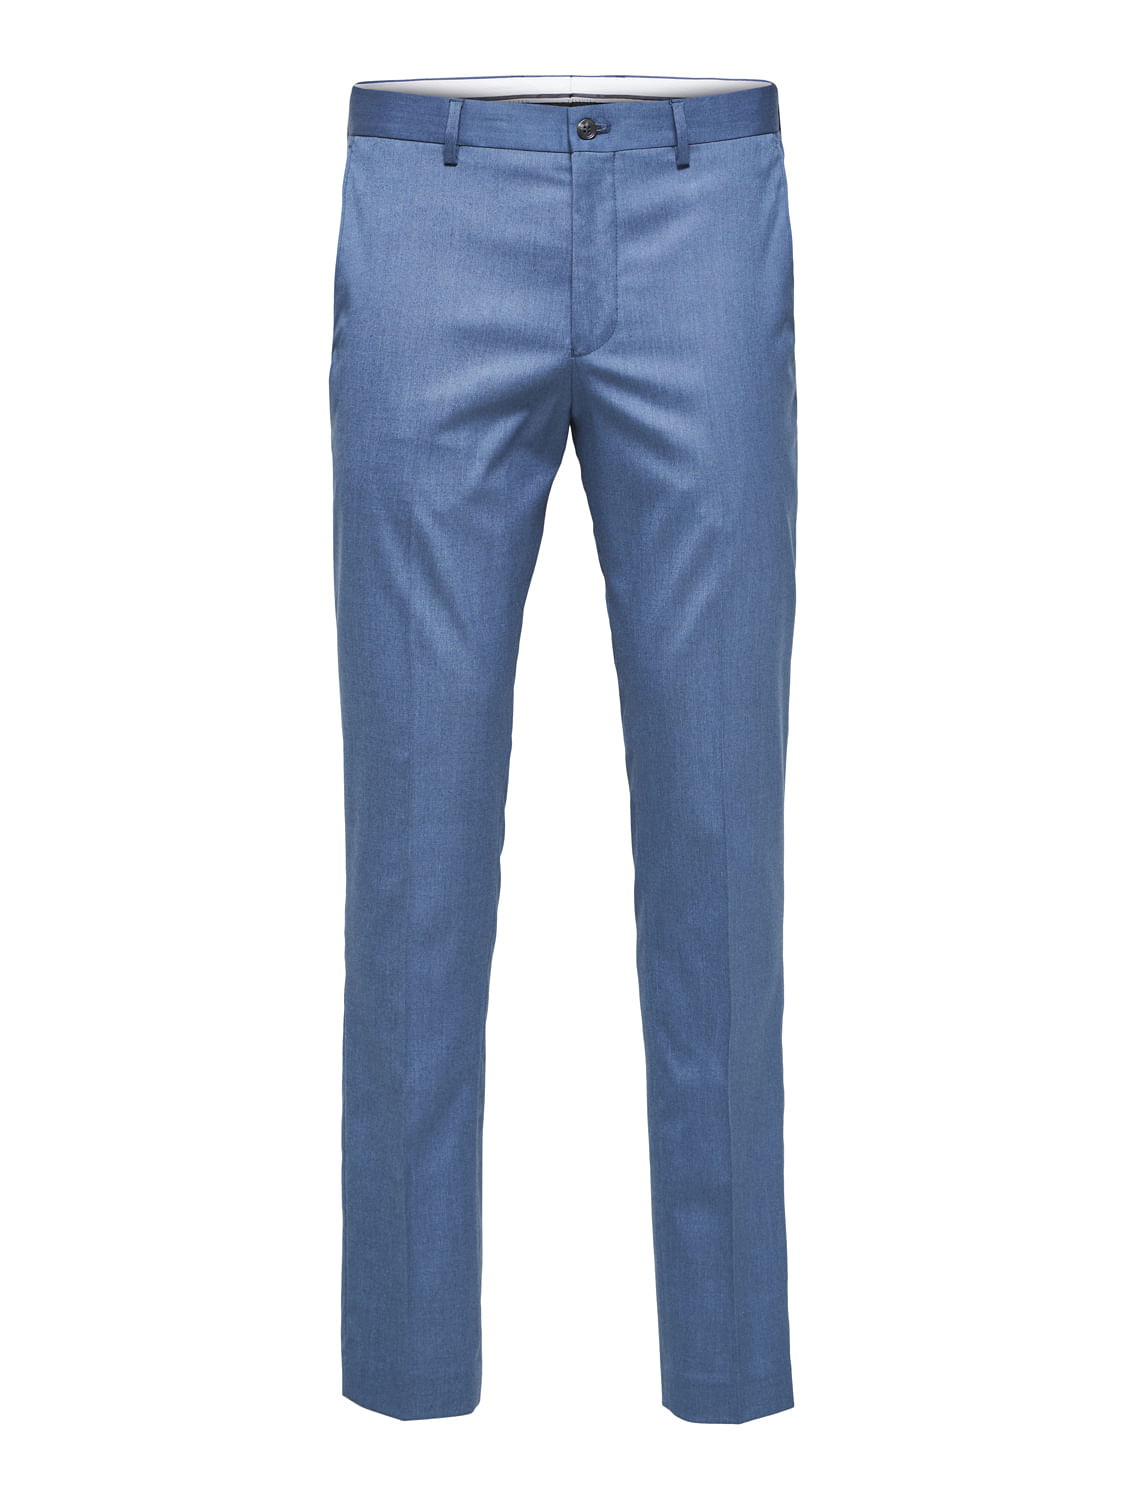 Textured Formal Trousers In Light Blue Phoenix Fit Mentor